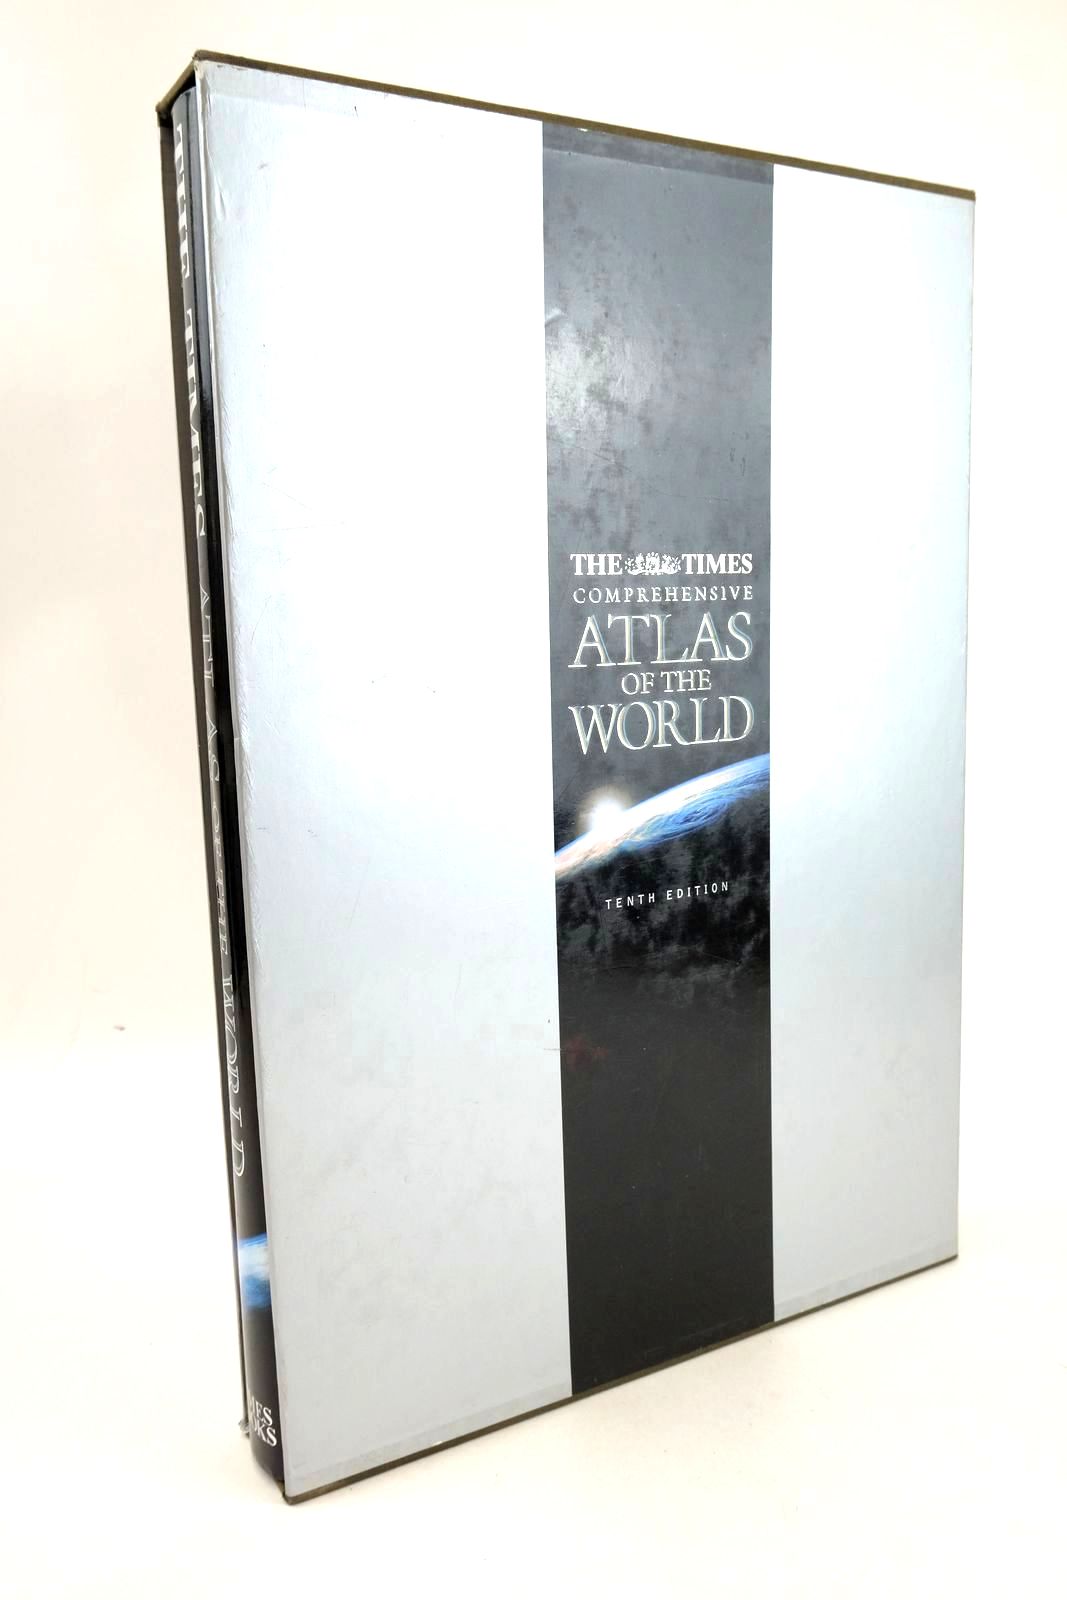 Photo of THE TIMES COMPREHENSIVE ATLAS OF THE WORLD published by Times Books (STOCK CODE: 1325738)  for sale by Stella & Rose's Books